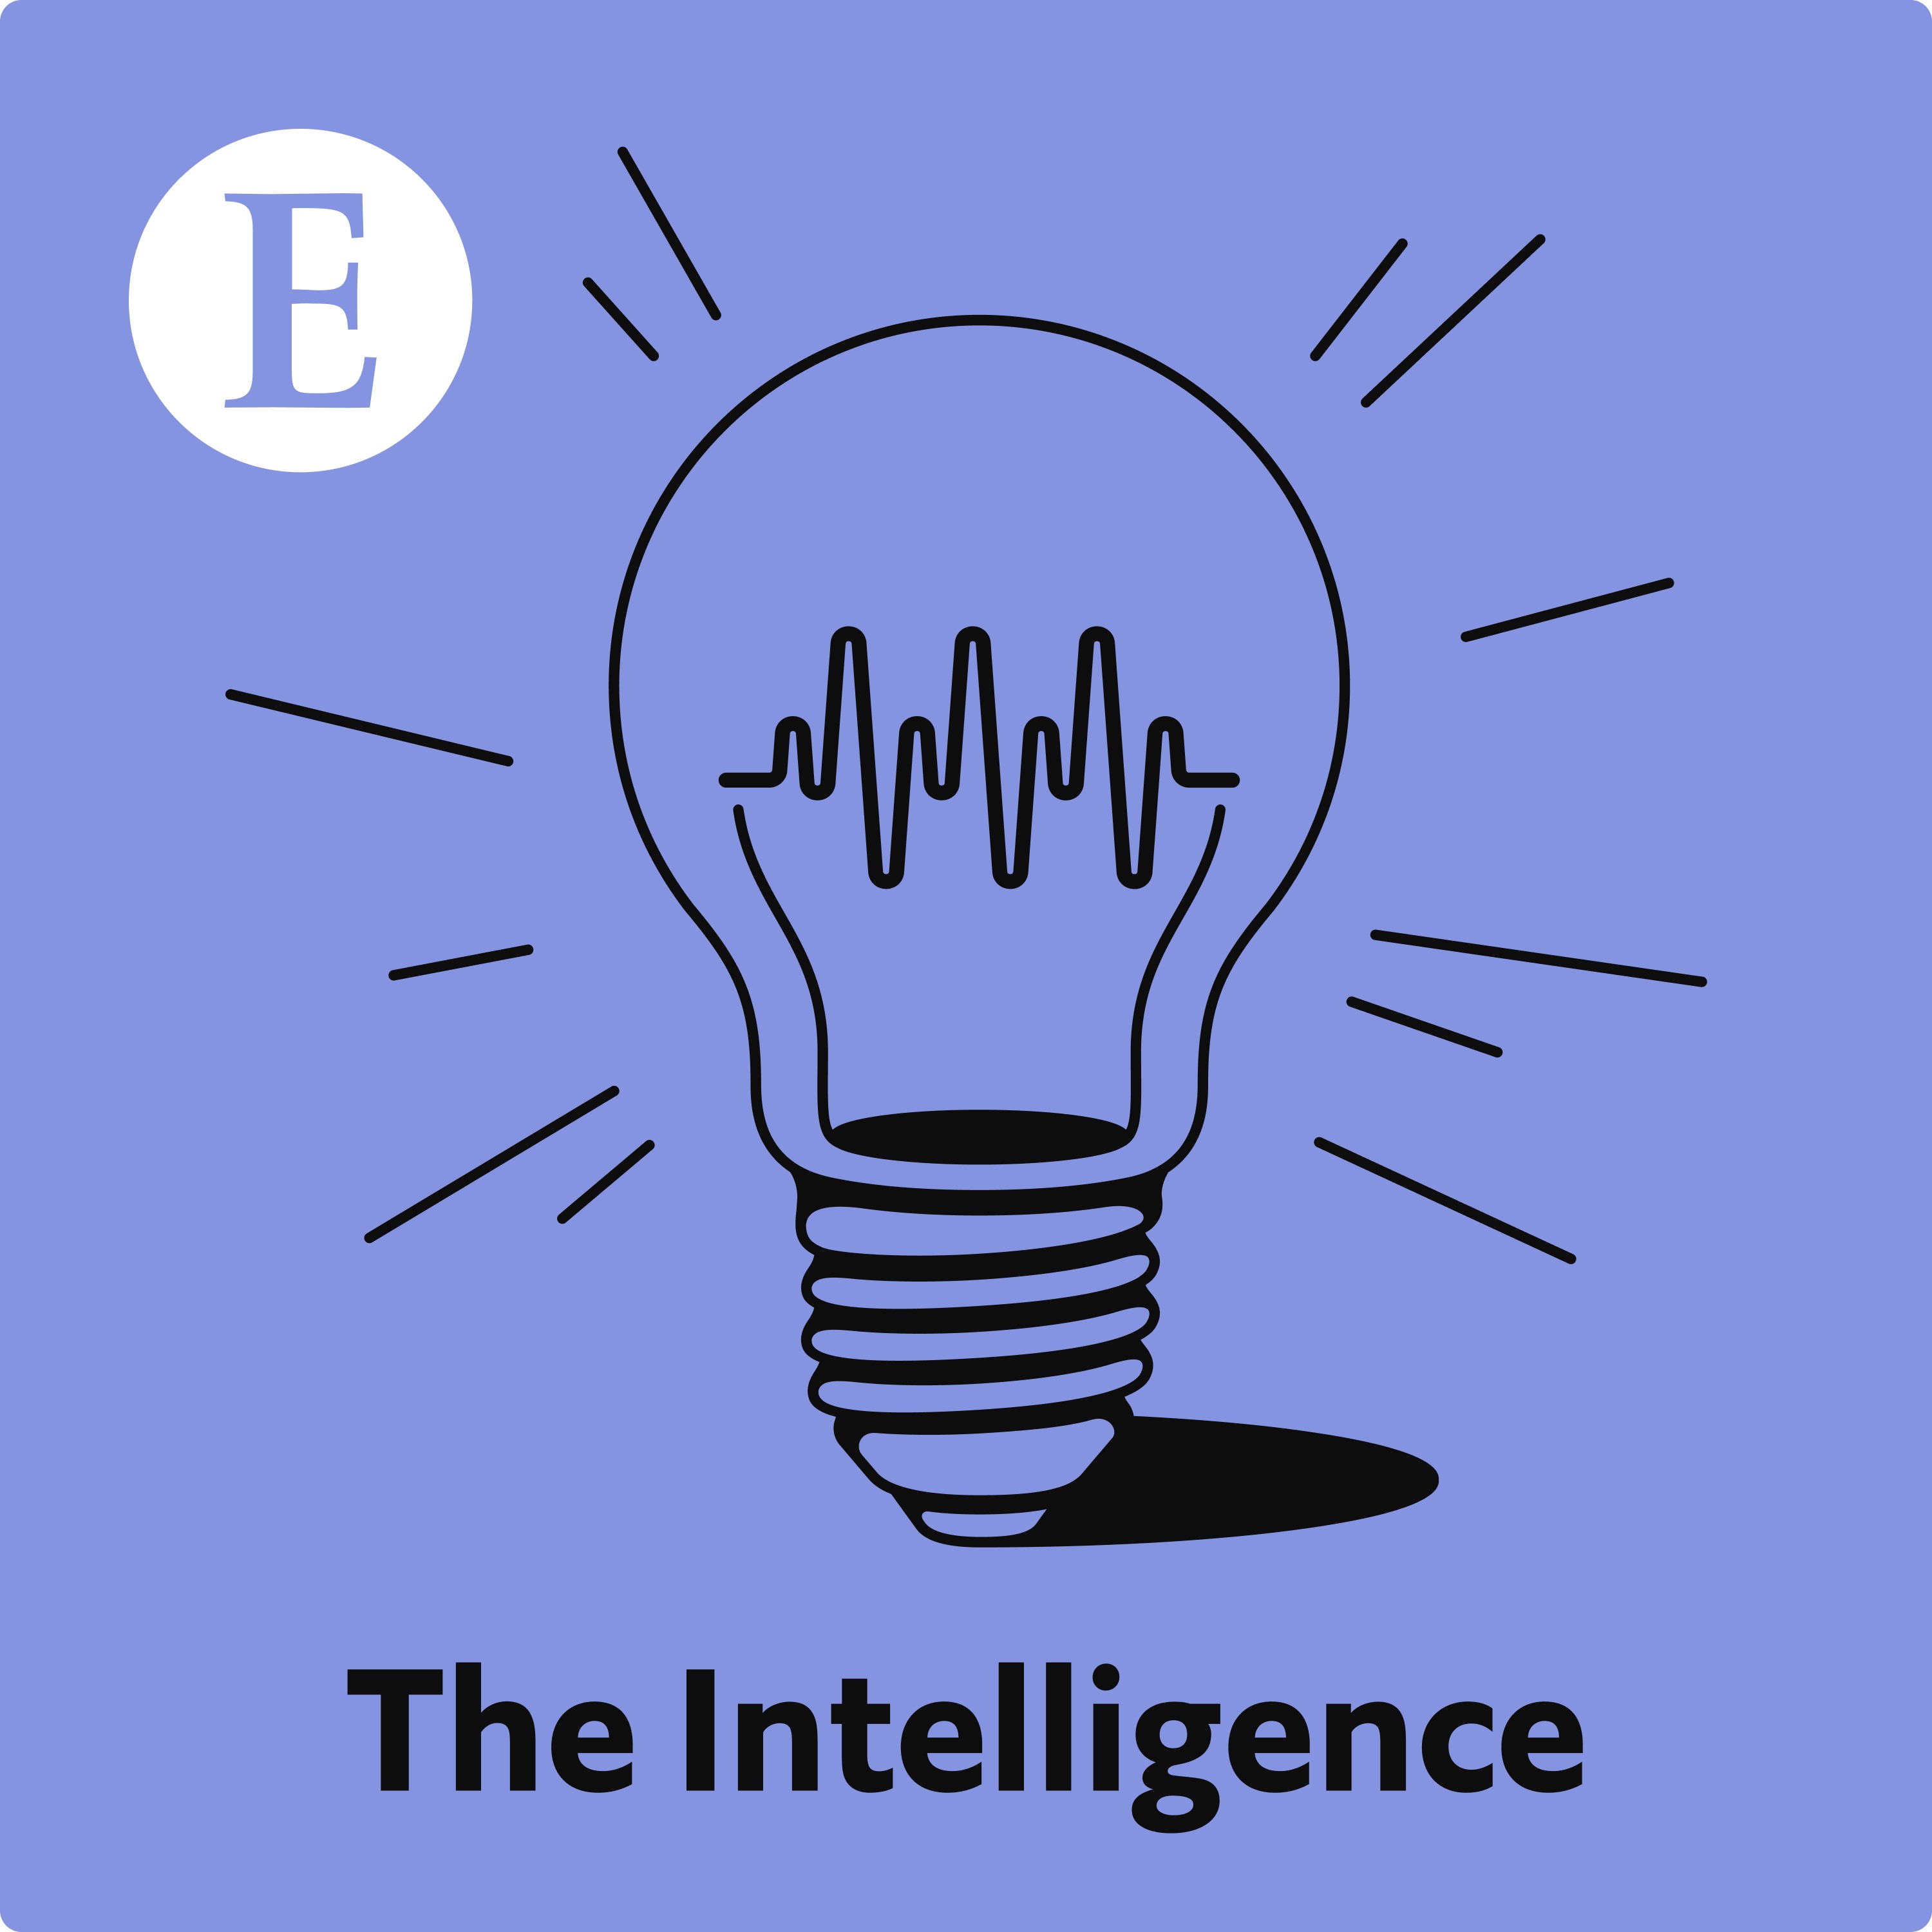 Refresh your feed: introducing Economist Podcasts+